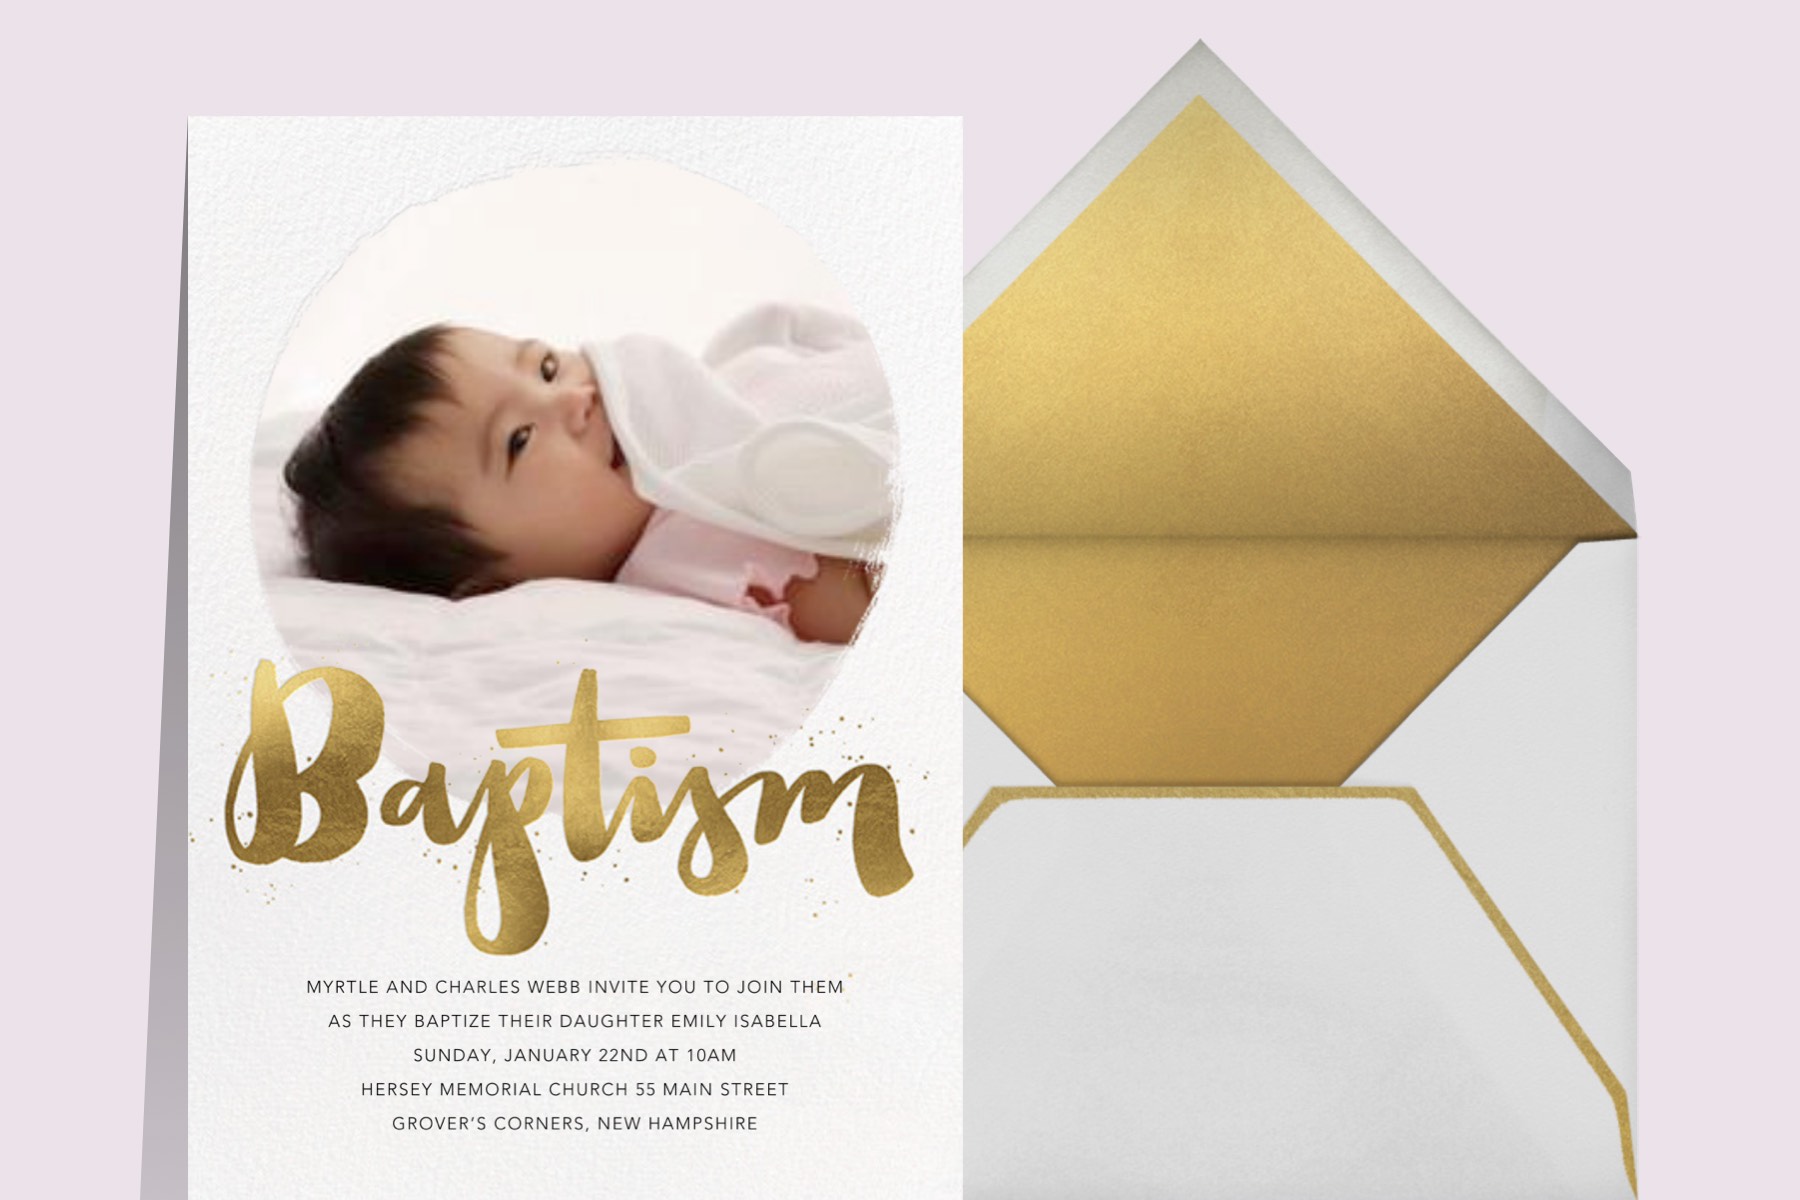 A photo card with a baby and the word “Baptism” written in gold script. 